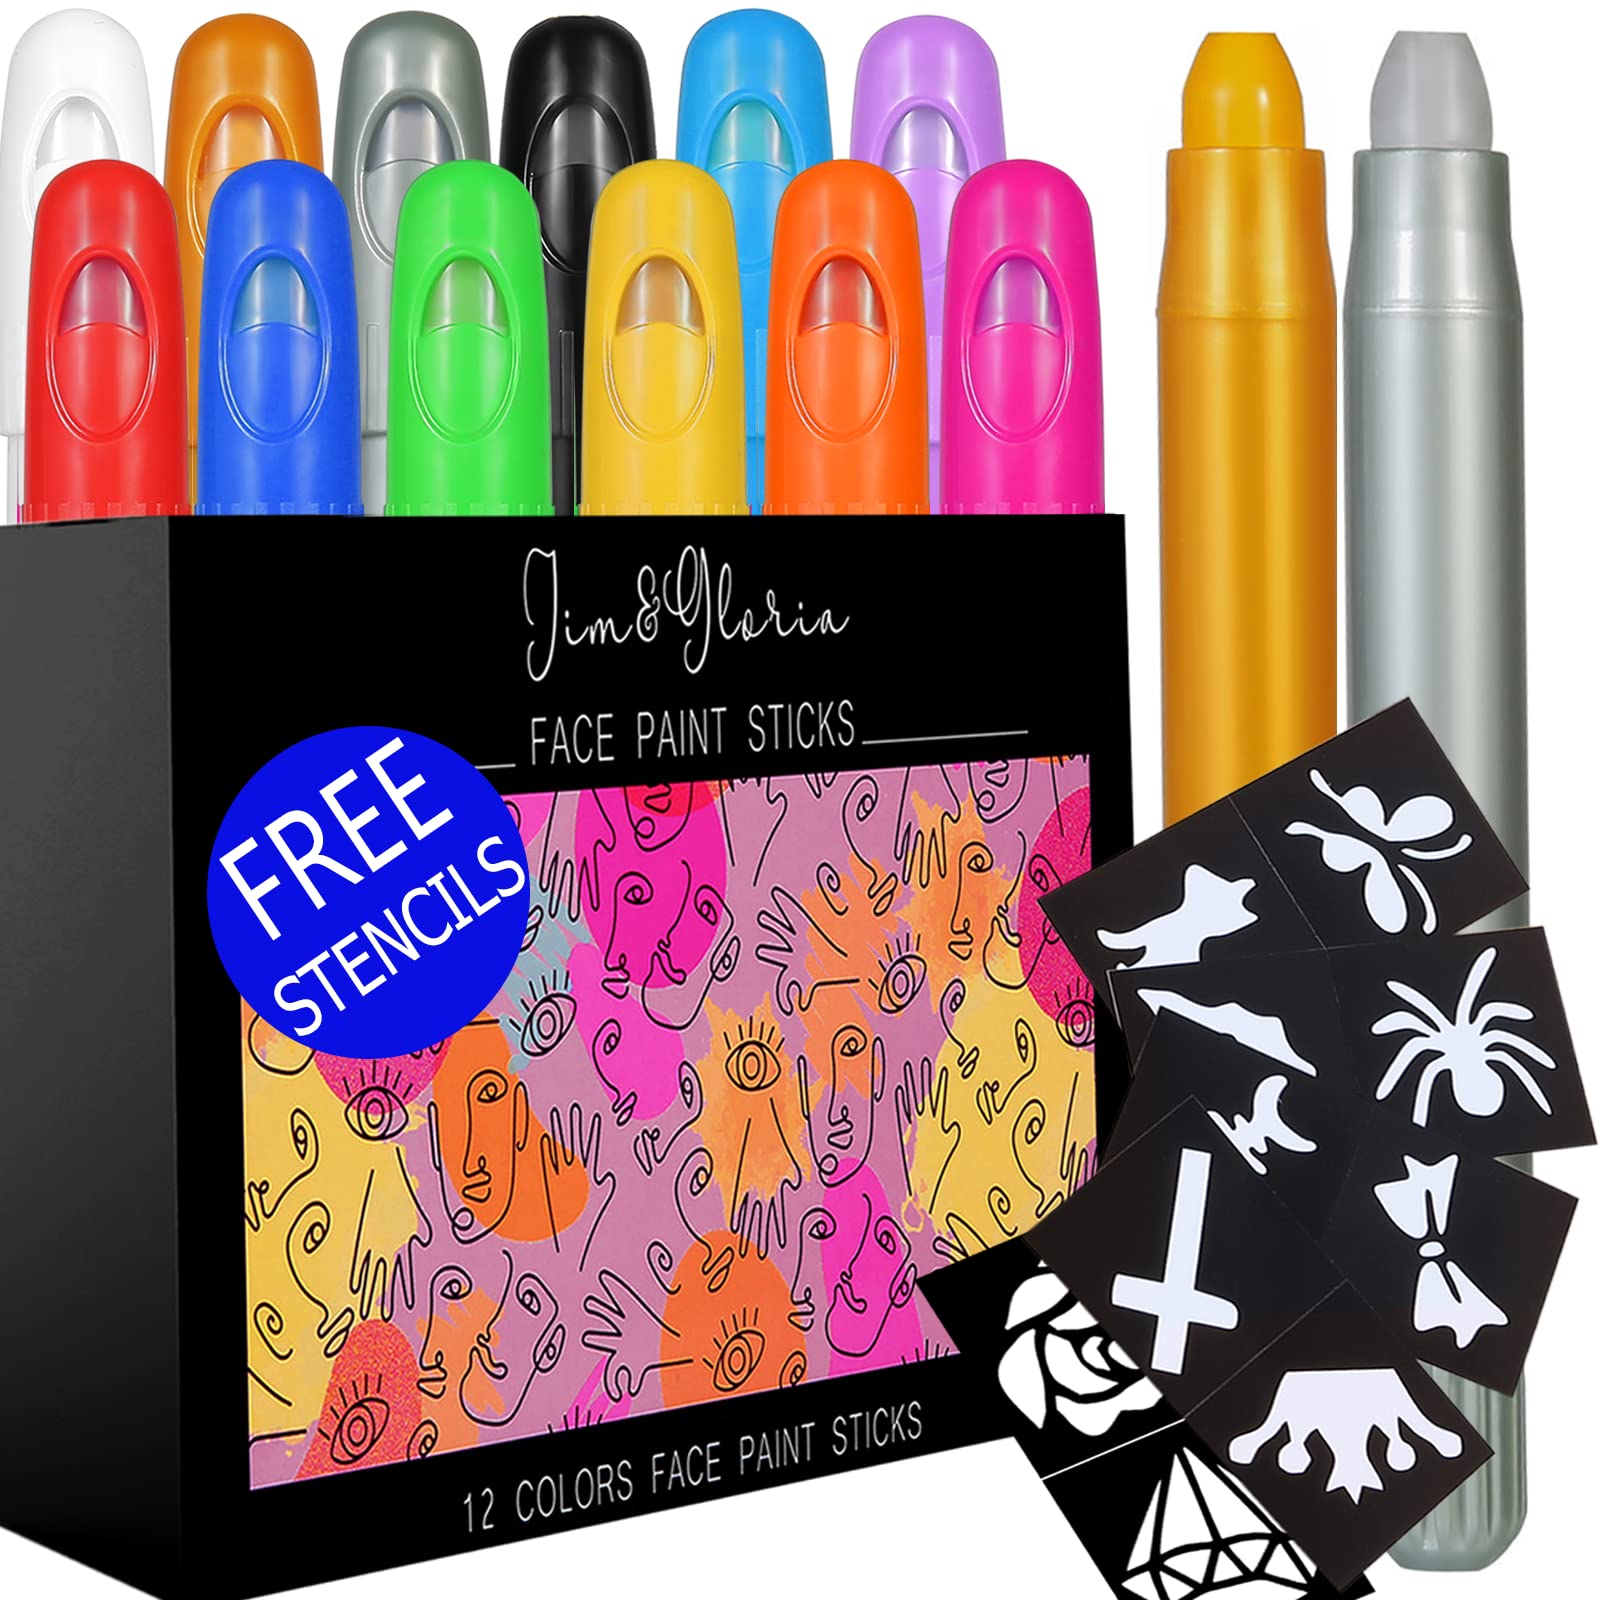 A set of 12 special markers for body art and face painting